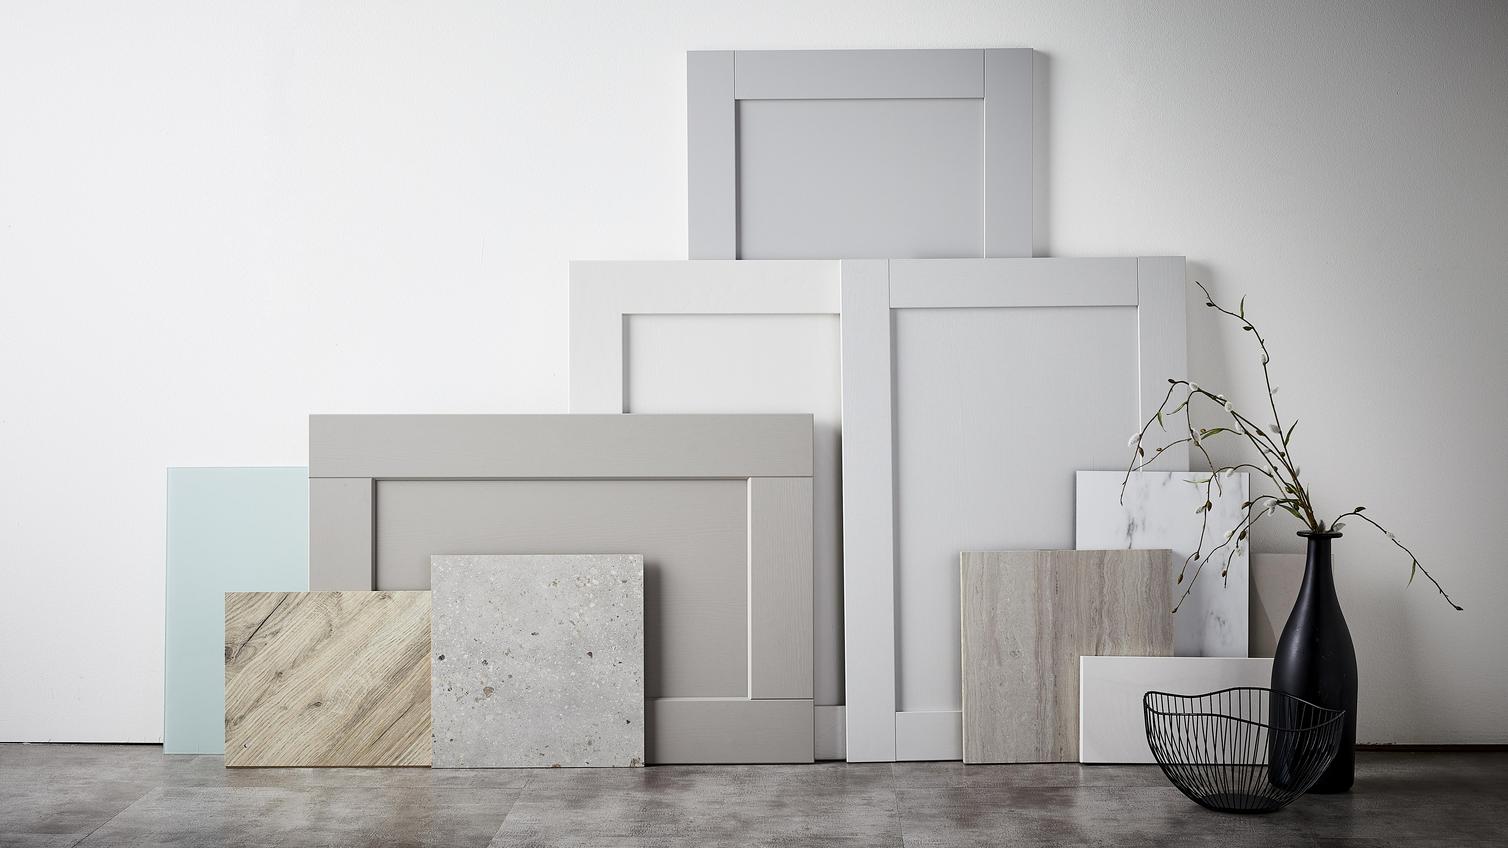 Calm haven flat lay showing a textured stone slab, light oak panels and shaker door fronts in tonal grey shades..